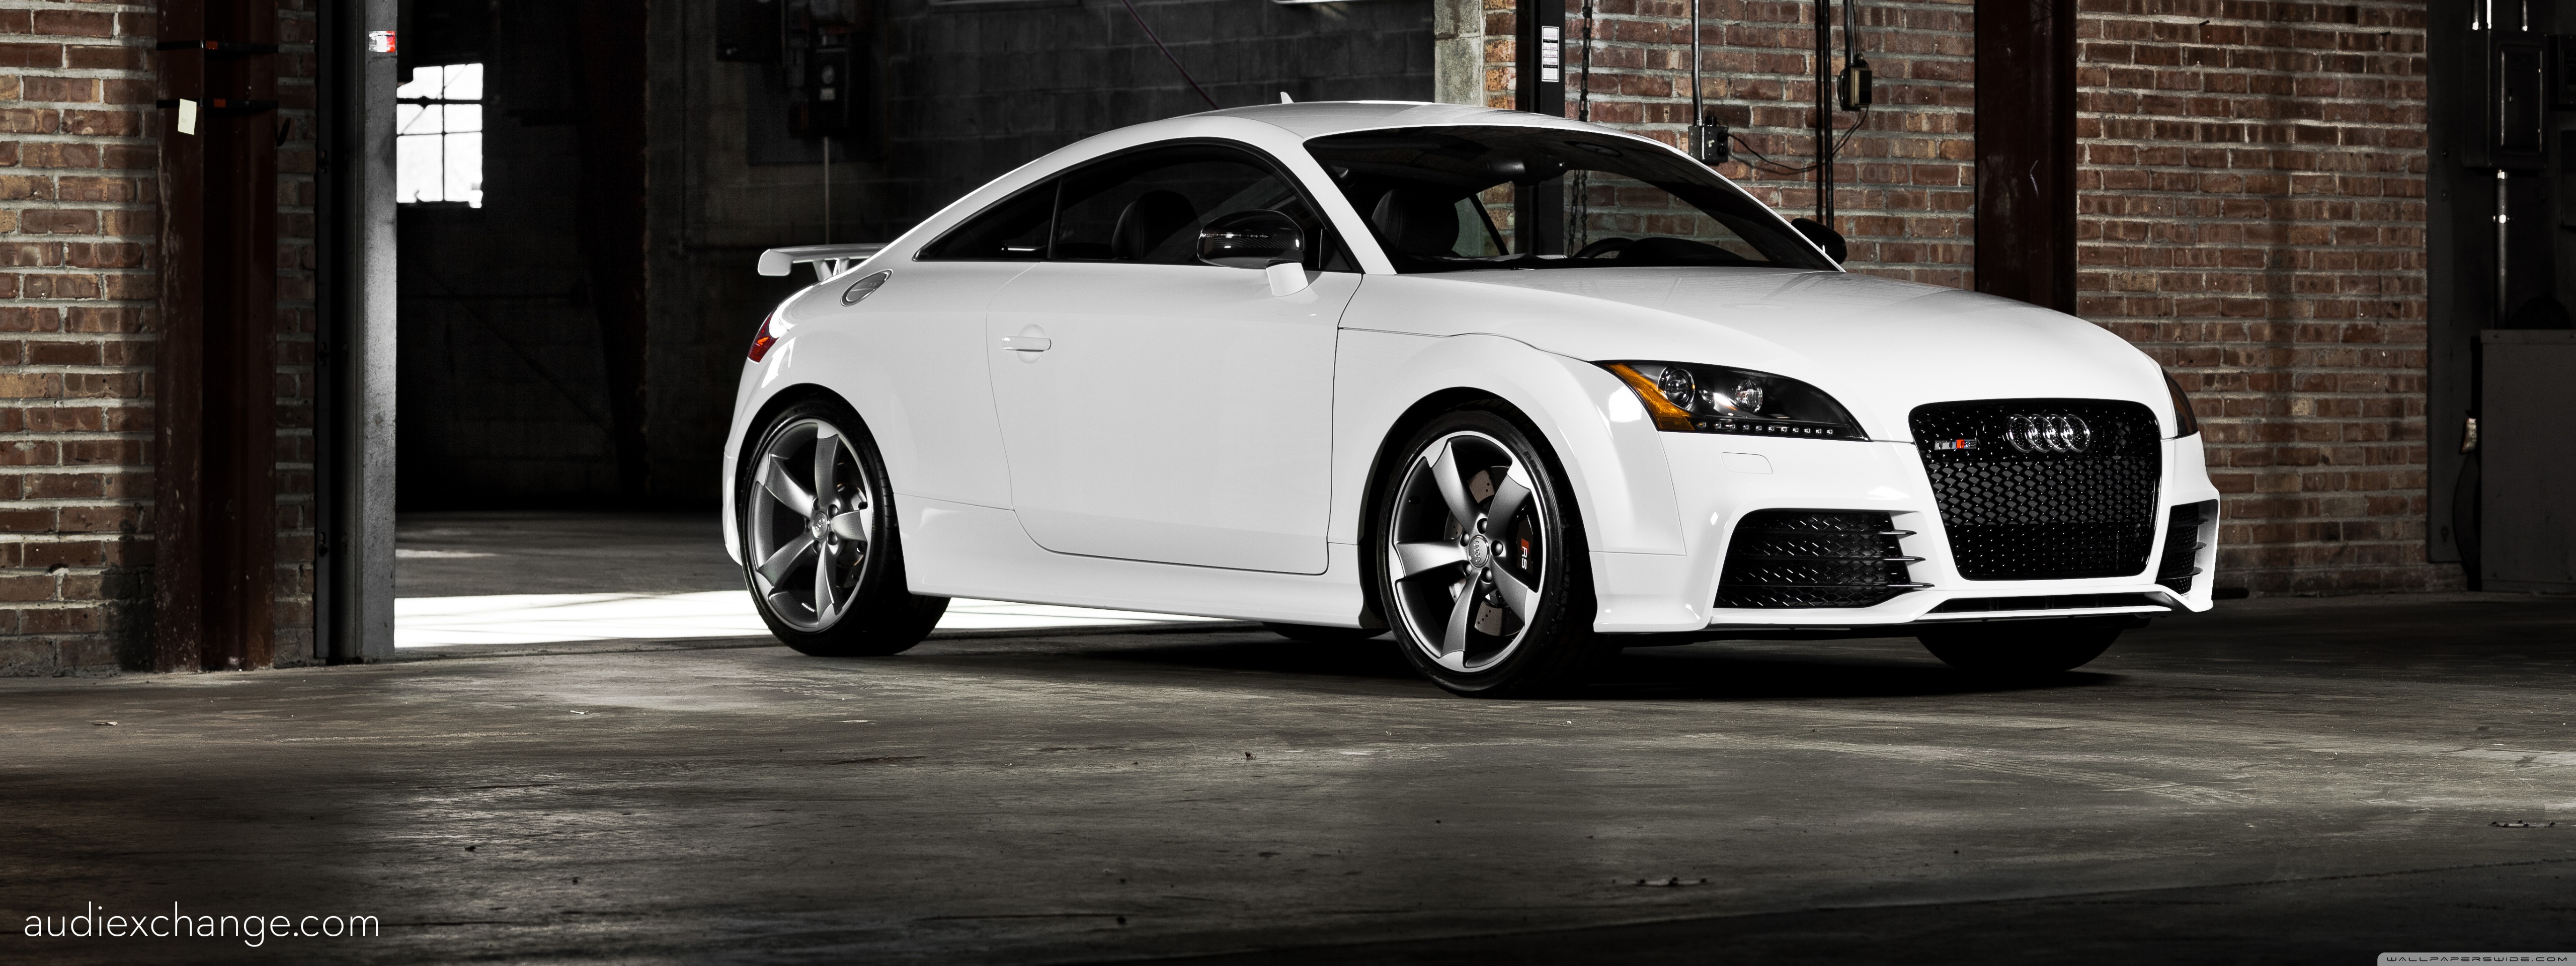 White Audi TT RS Coupe In Warehouse Exchange Park, IL Ultra HD Desktop Background Wallpaper For 4K UHD TV, Multi Display, Dual Monitor, Tablet